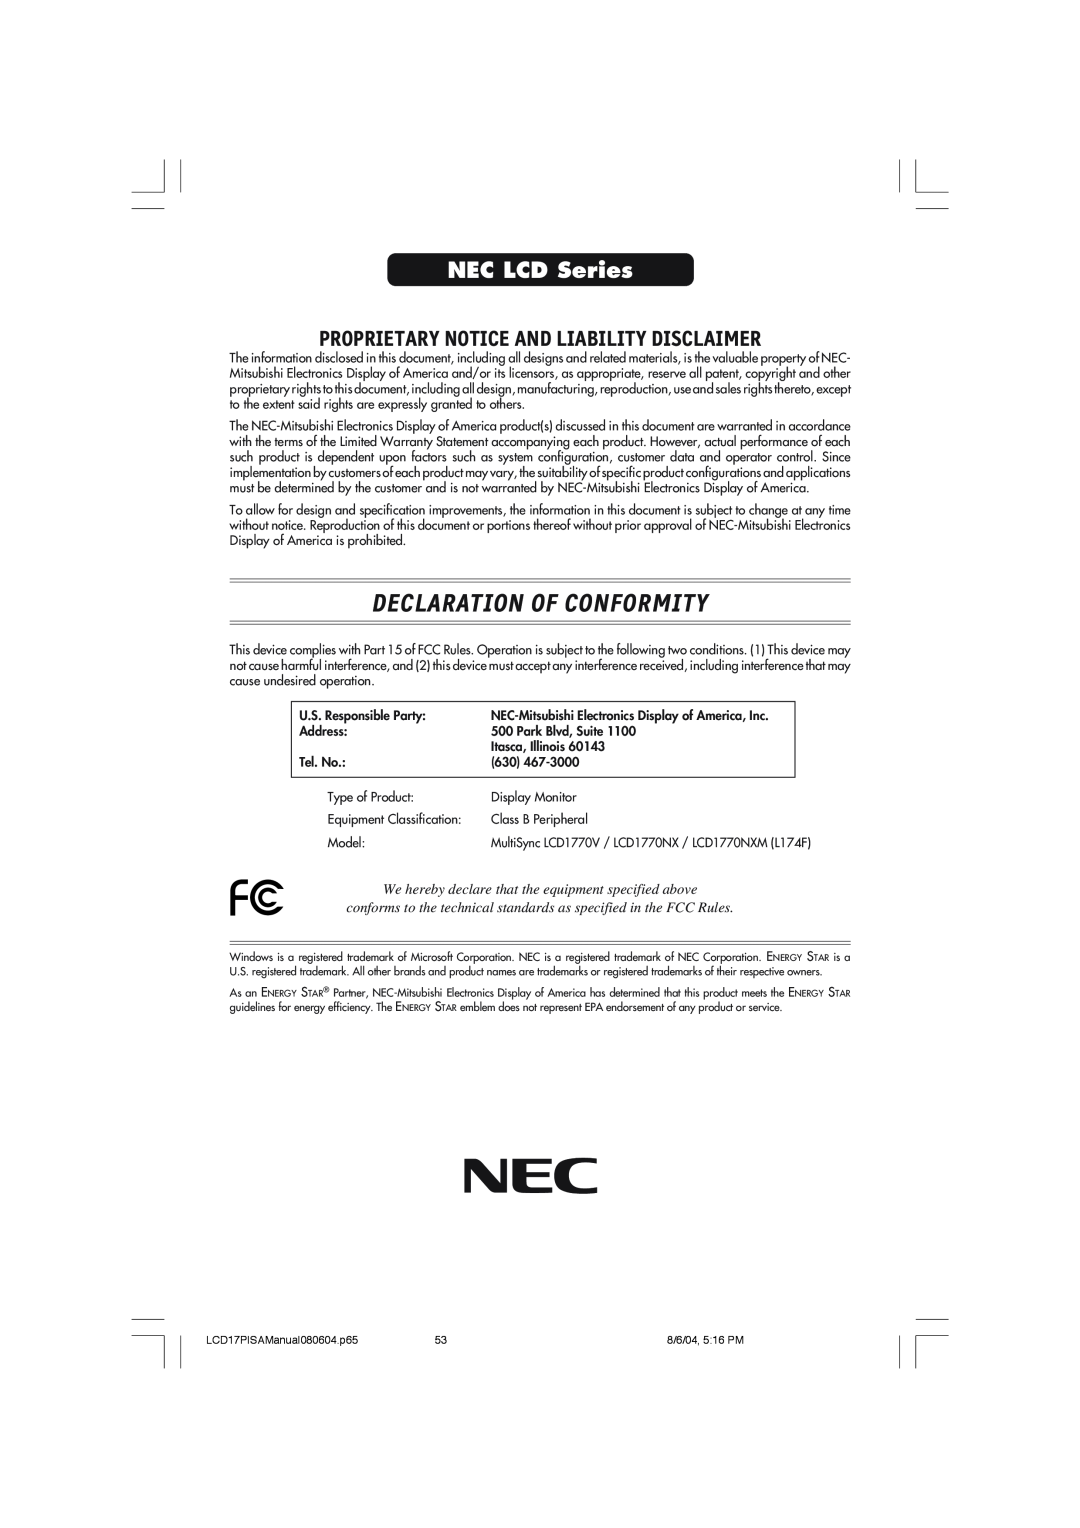 NEC LCD1770V, LCD1770NX, LCD1770NXM Declaration Of Conformity, NEC LCD Series, Proprietary Notice And Liability Disclaimer 